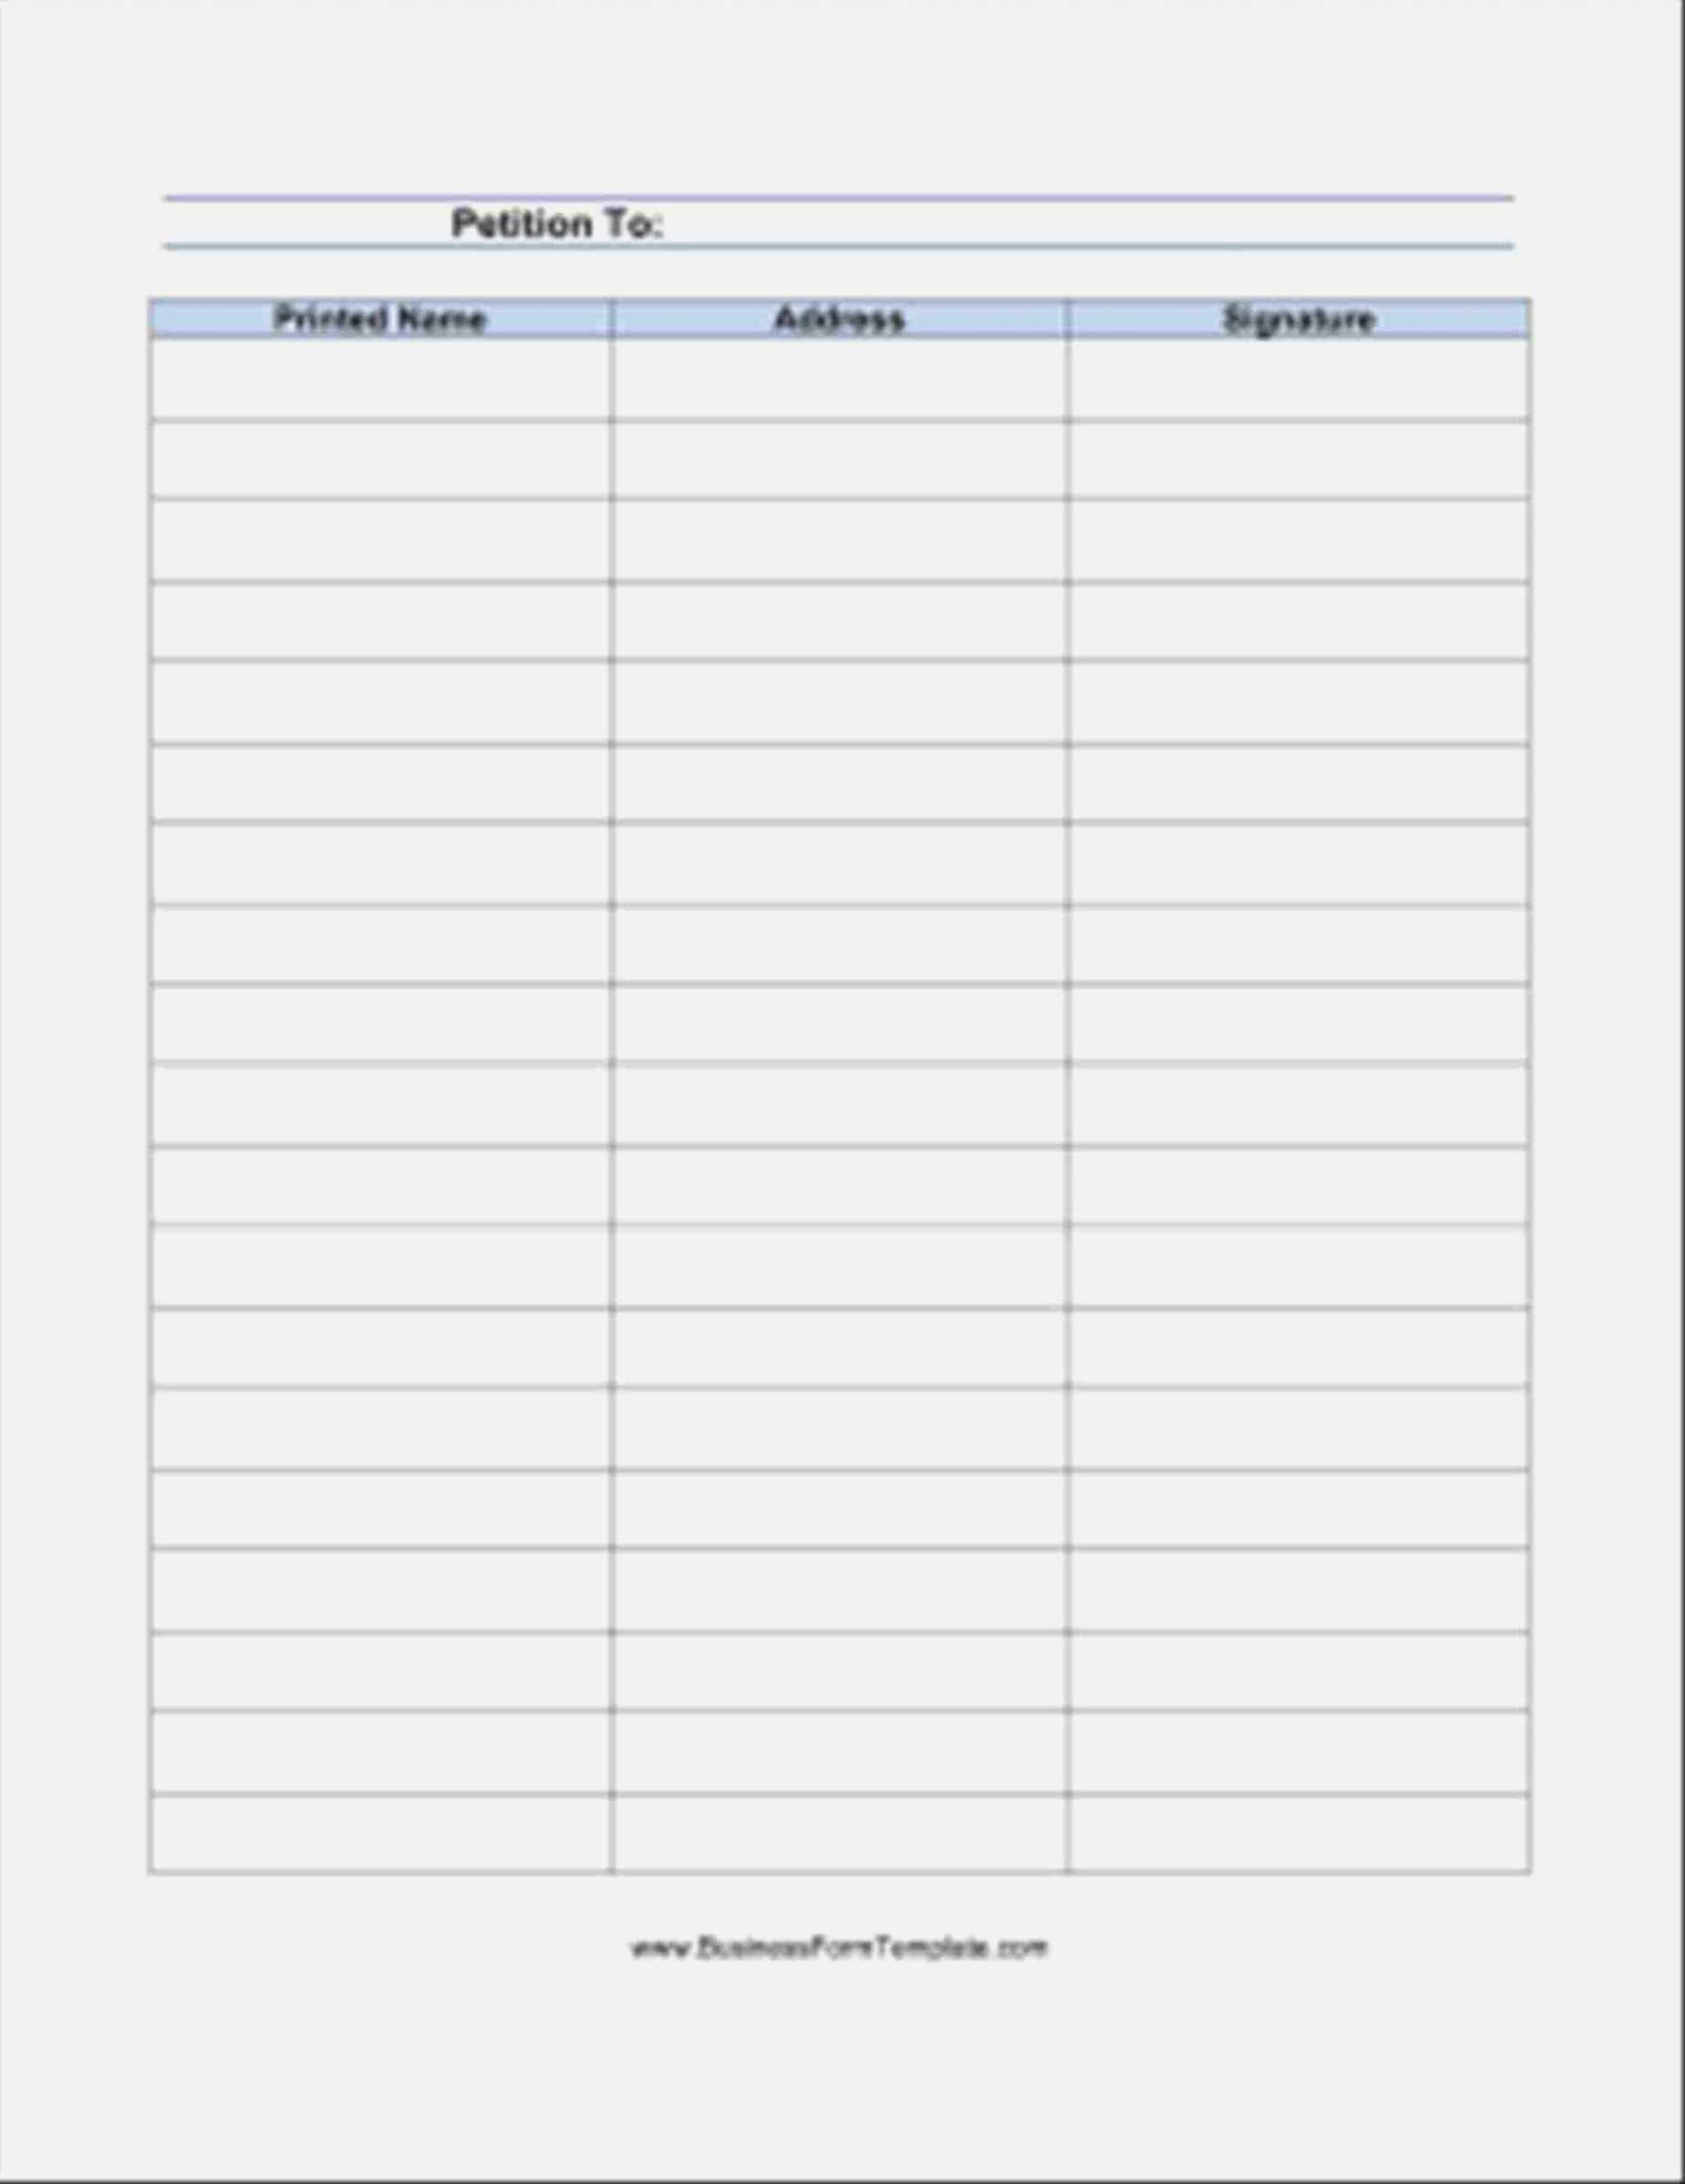 14 Petition Form Template | Realty Executives Mi : Invoice For Blank Petition Template